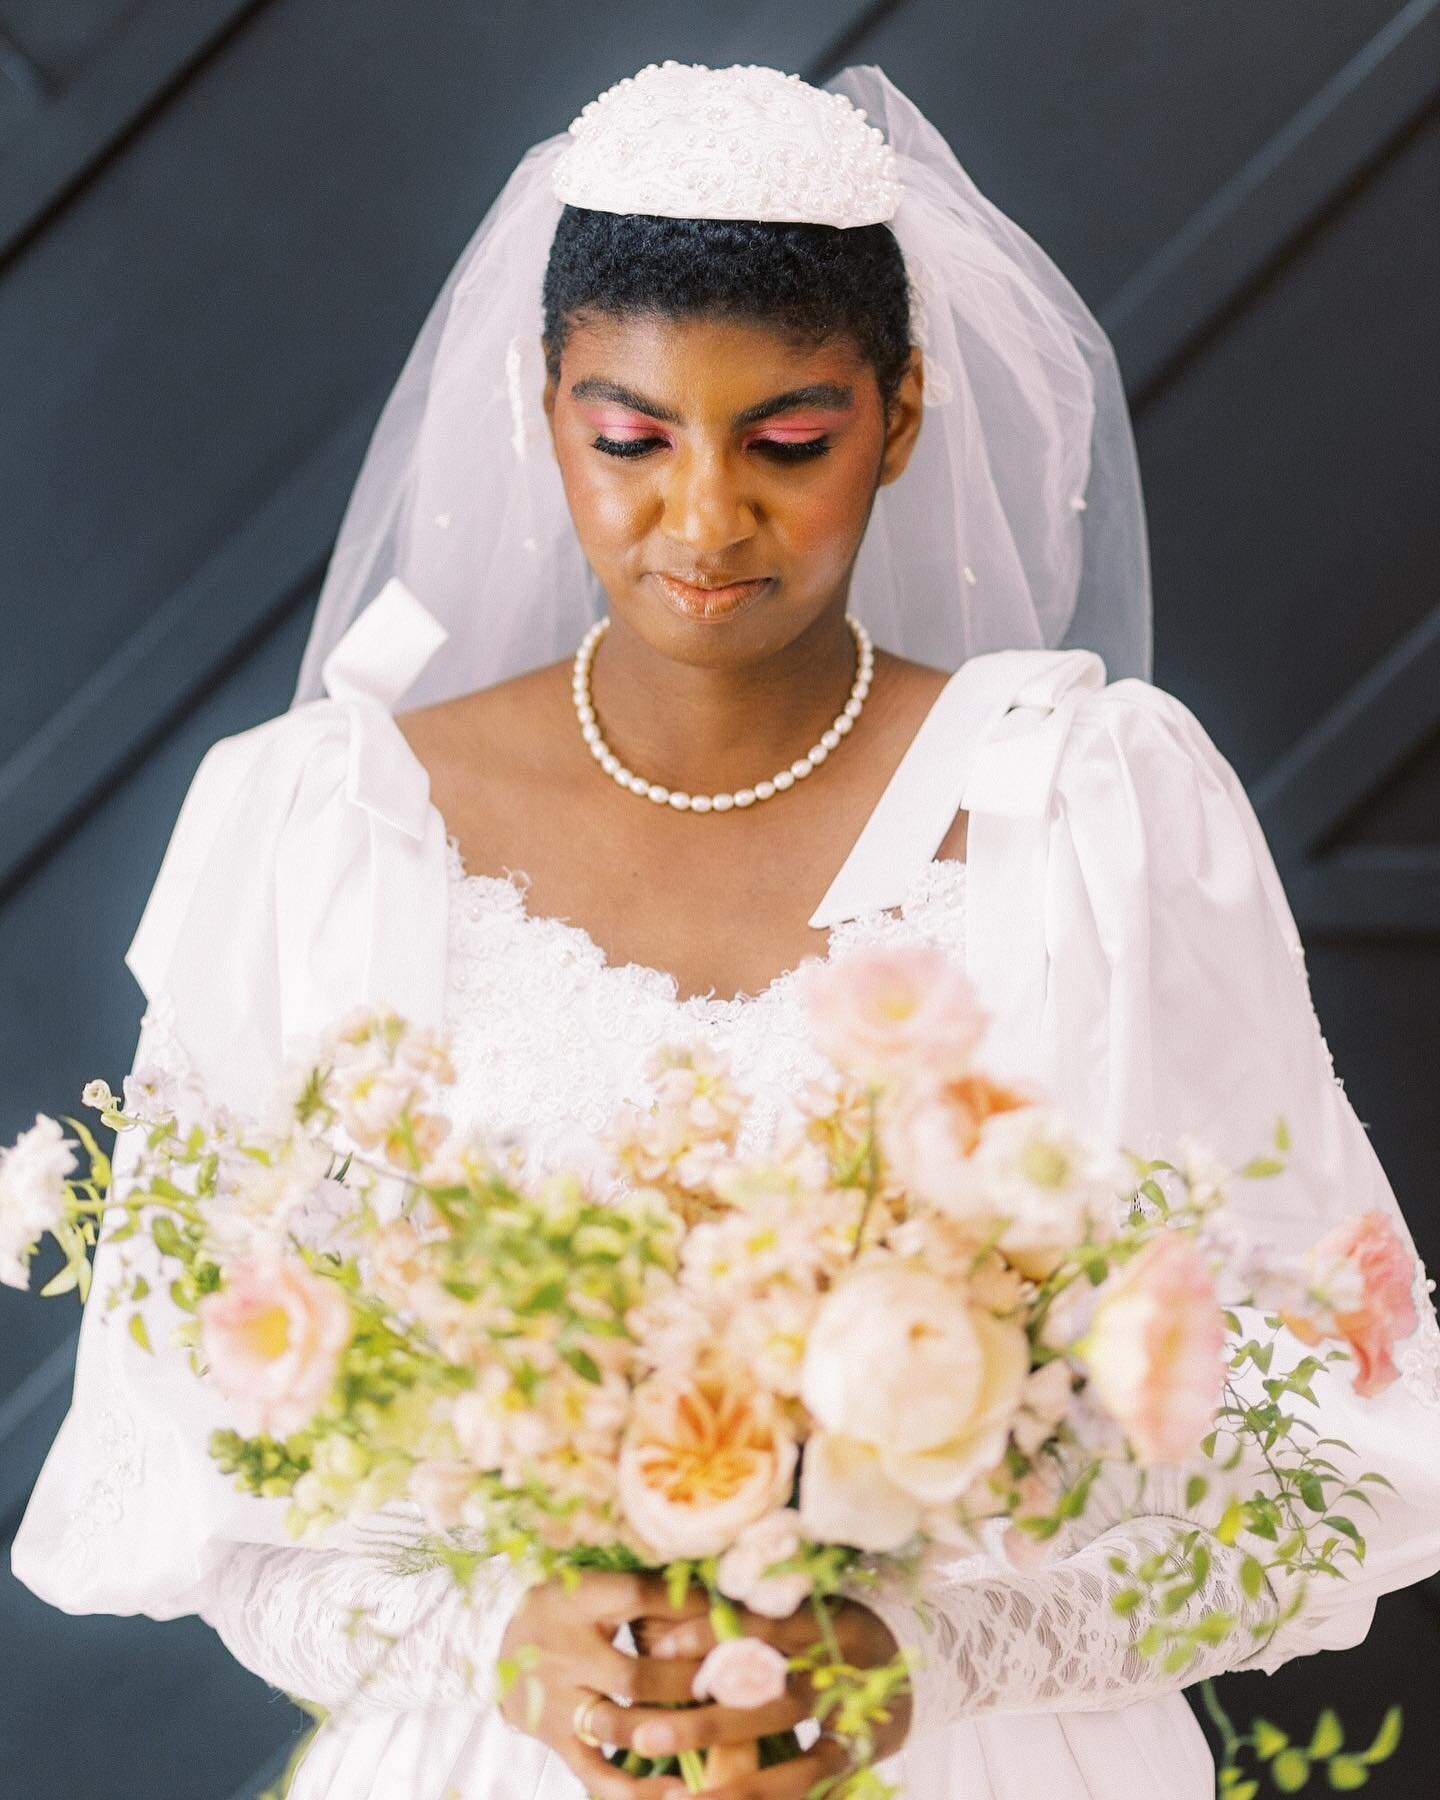 Category is: bridal editorial 🤍✨ 
.
Had so much fun with this 80&rsquo;s inspired eye/blushed look for Briana! 
Makeup by me
Photography @jennywagnerphoto 
Florals @yarrowfloralco 
#baltimoreflorist #baltimoremakeupartist #makeup #bridaleditorial #b